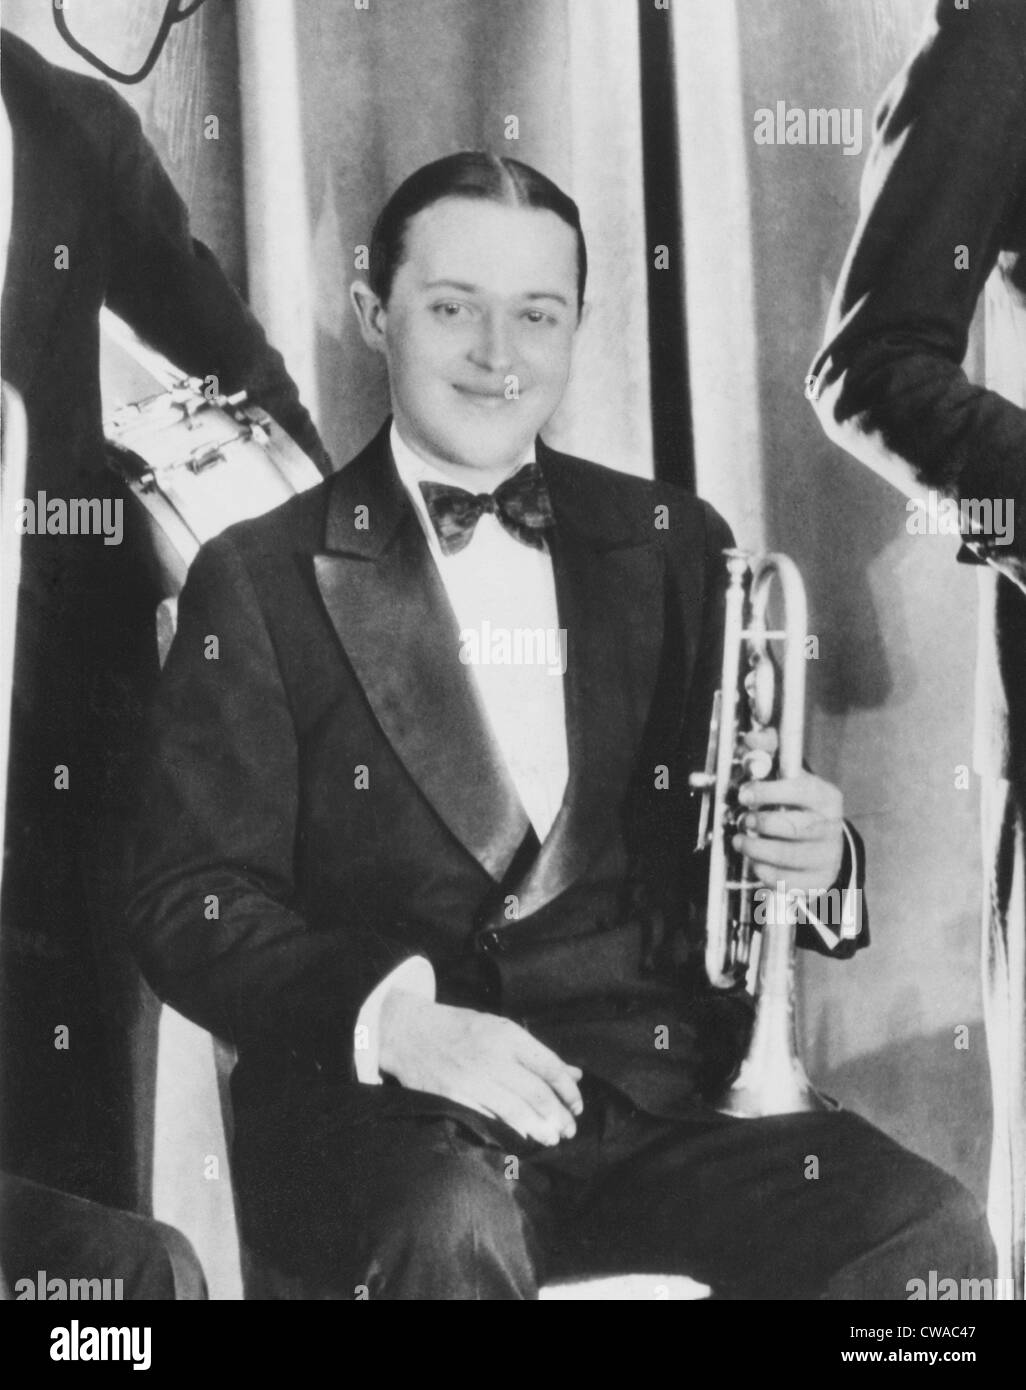 Bix Beiderbecke, at the Club New Yorker, September 1927. Courtesy: CSU Archives/Everett Collection Stock Photo